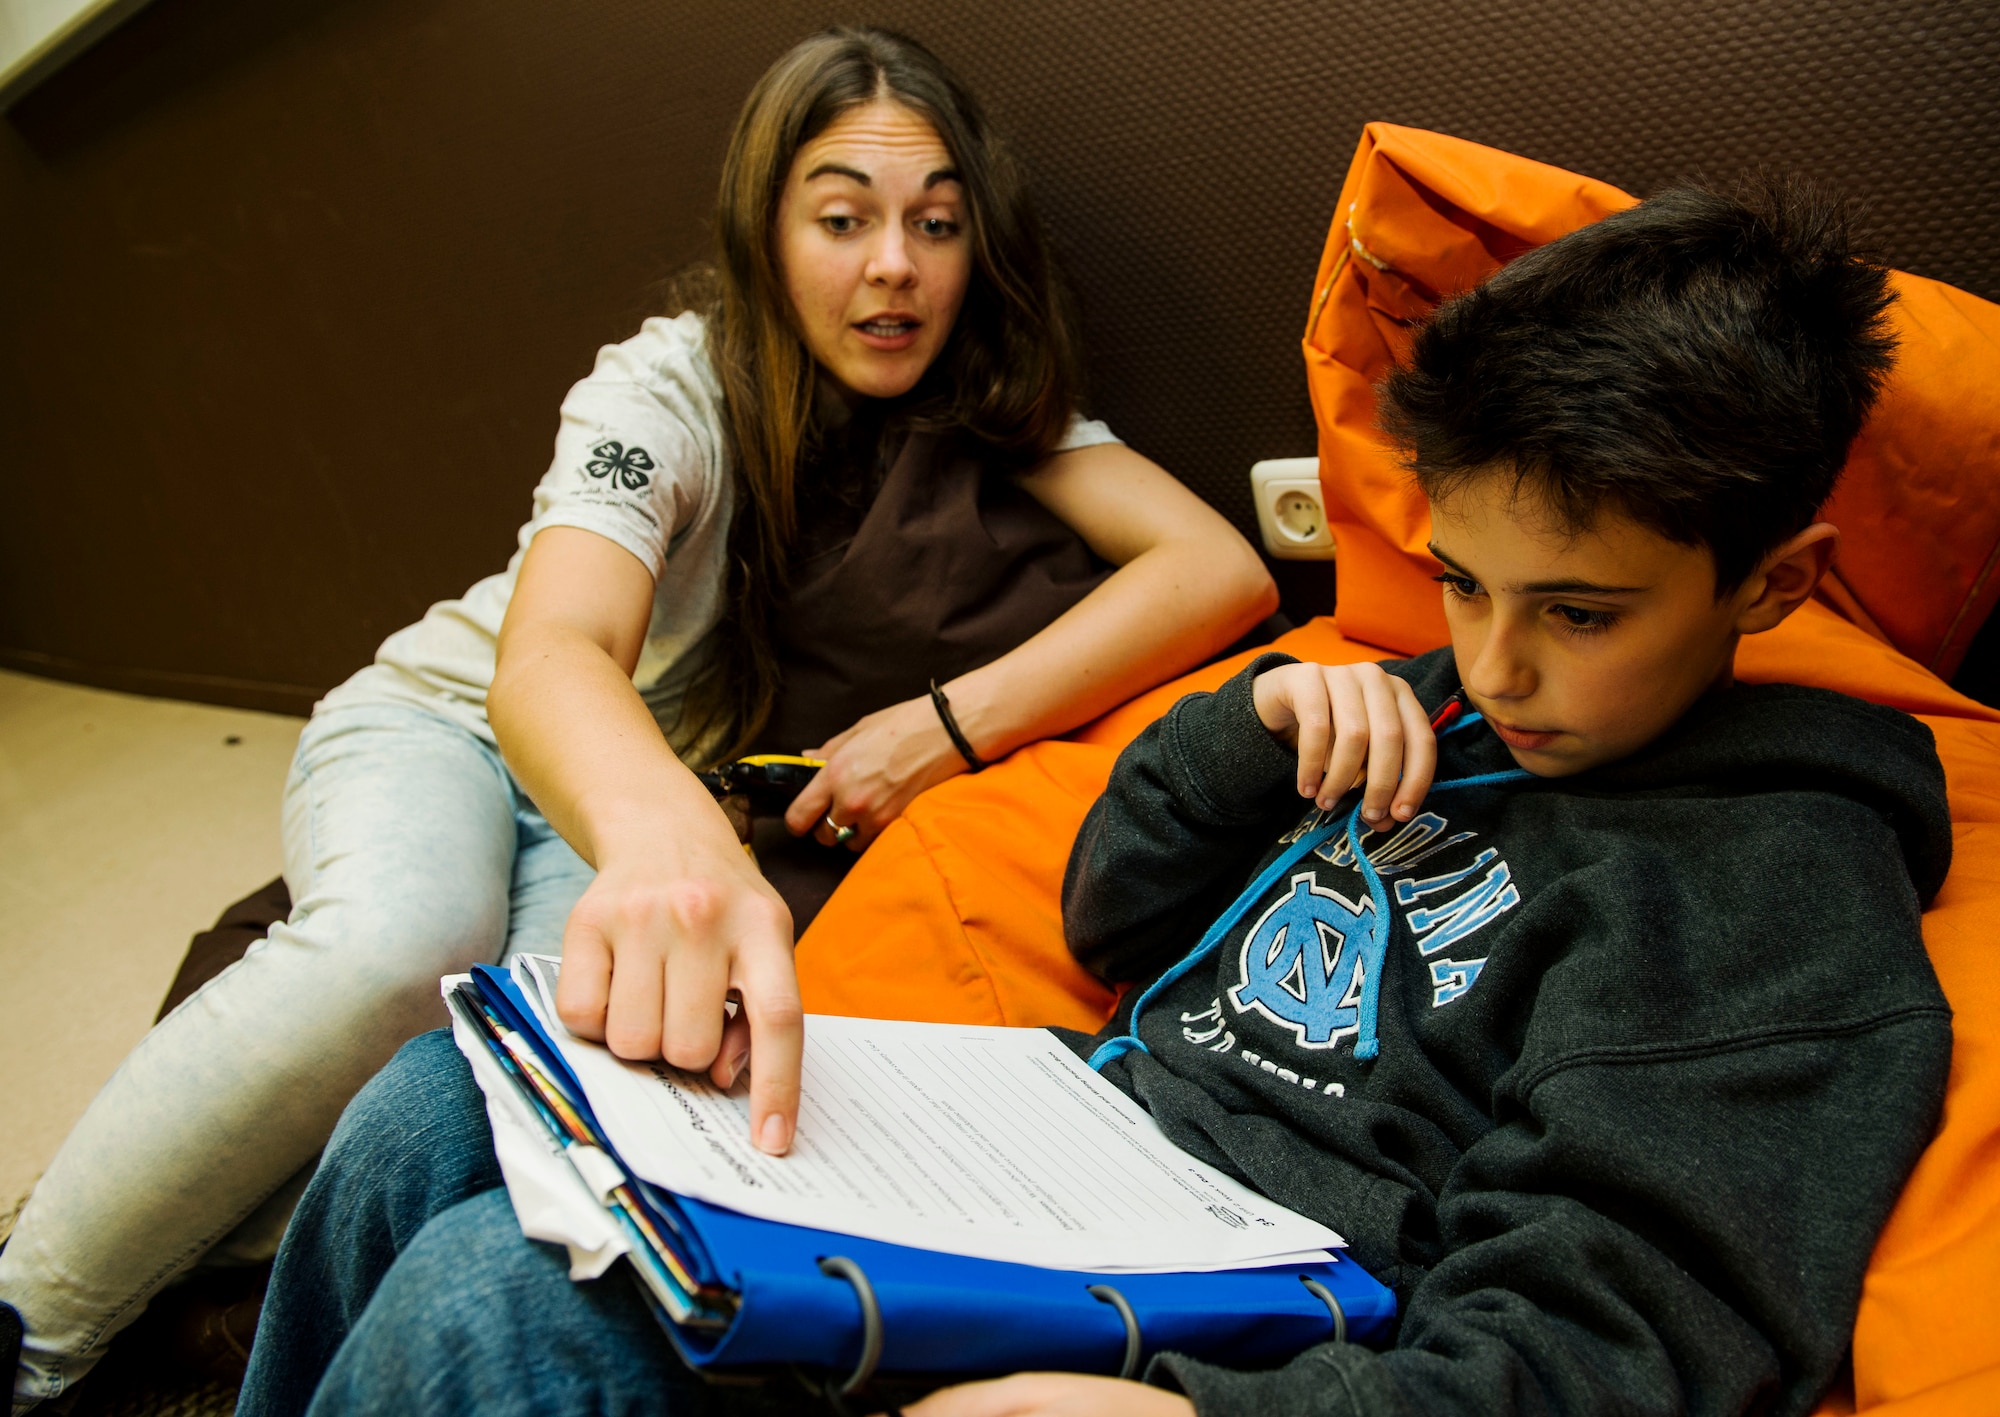 Brianna Johnston, 52nd Force Support Squadron School Age Care Program Power Hour staff member, left, assists Jackson Sansosti, right, with homework during the Power Hour in the School Age Program building at Spangdahlem Air Base, Germany, Nov. 10, 2015. The SACP staff guides students from the ages of eight to 12 on homework and other school-related subjects. (U.S. Air Force photo by Airman 1st Class Timothy Kim/Released)